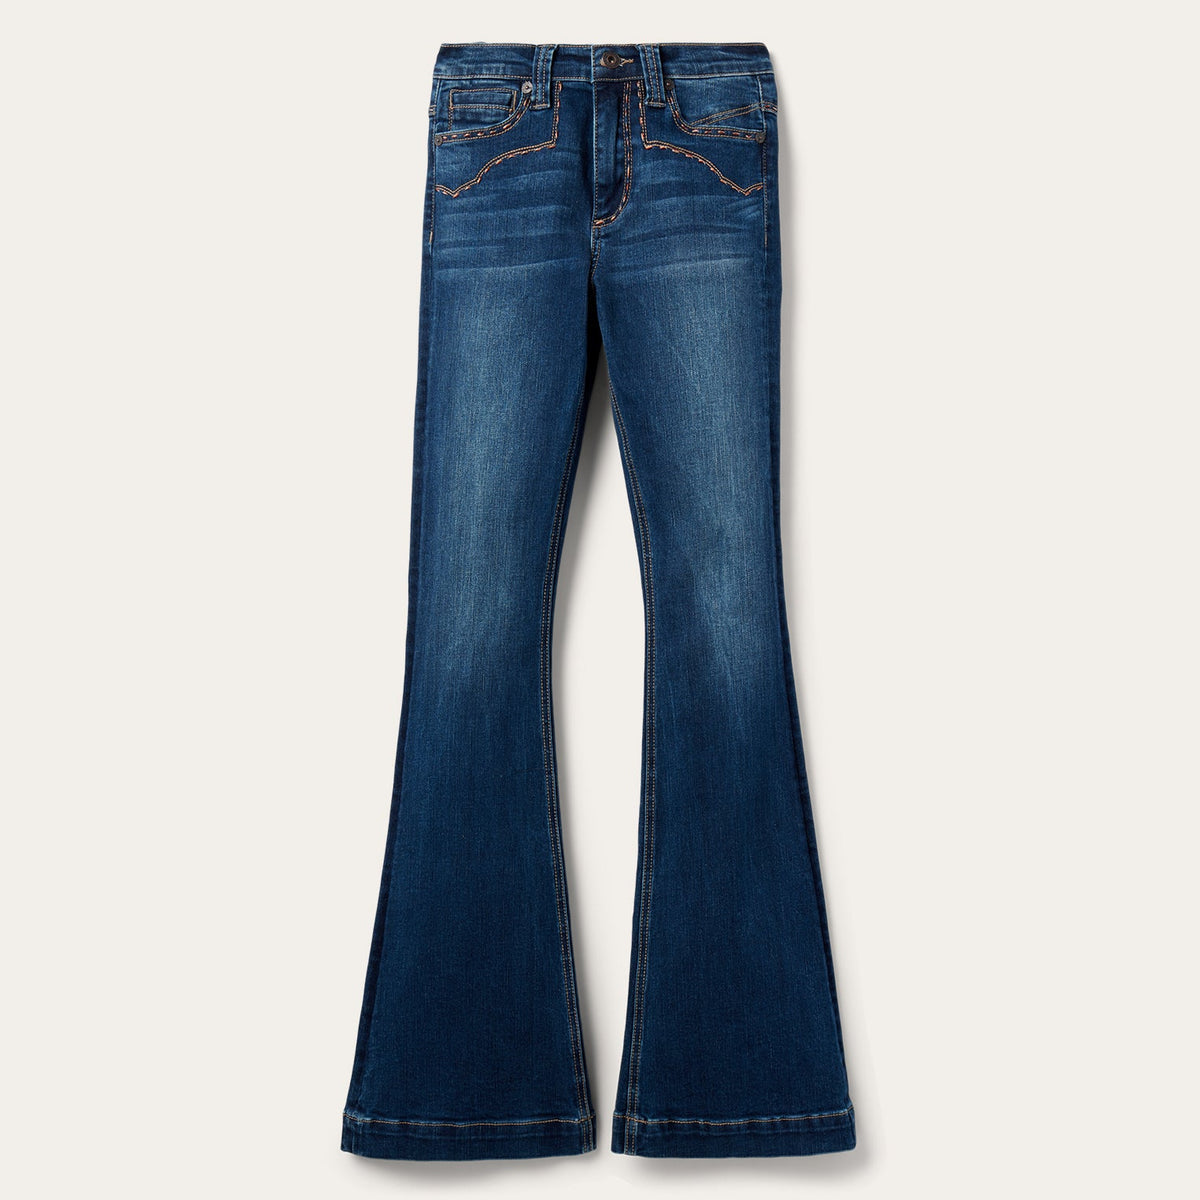 Stetson 921 High Rise Flare Jeans